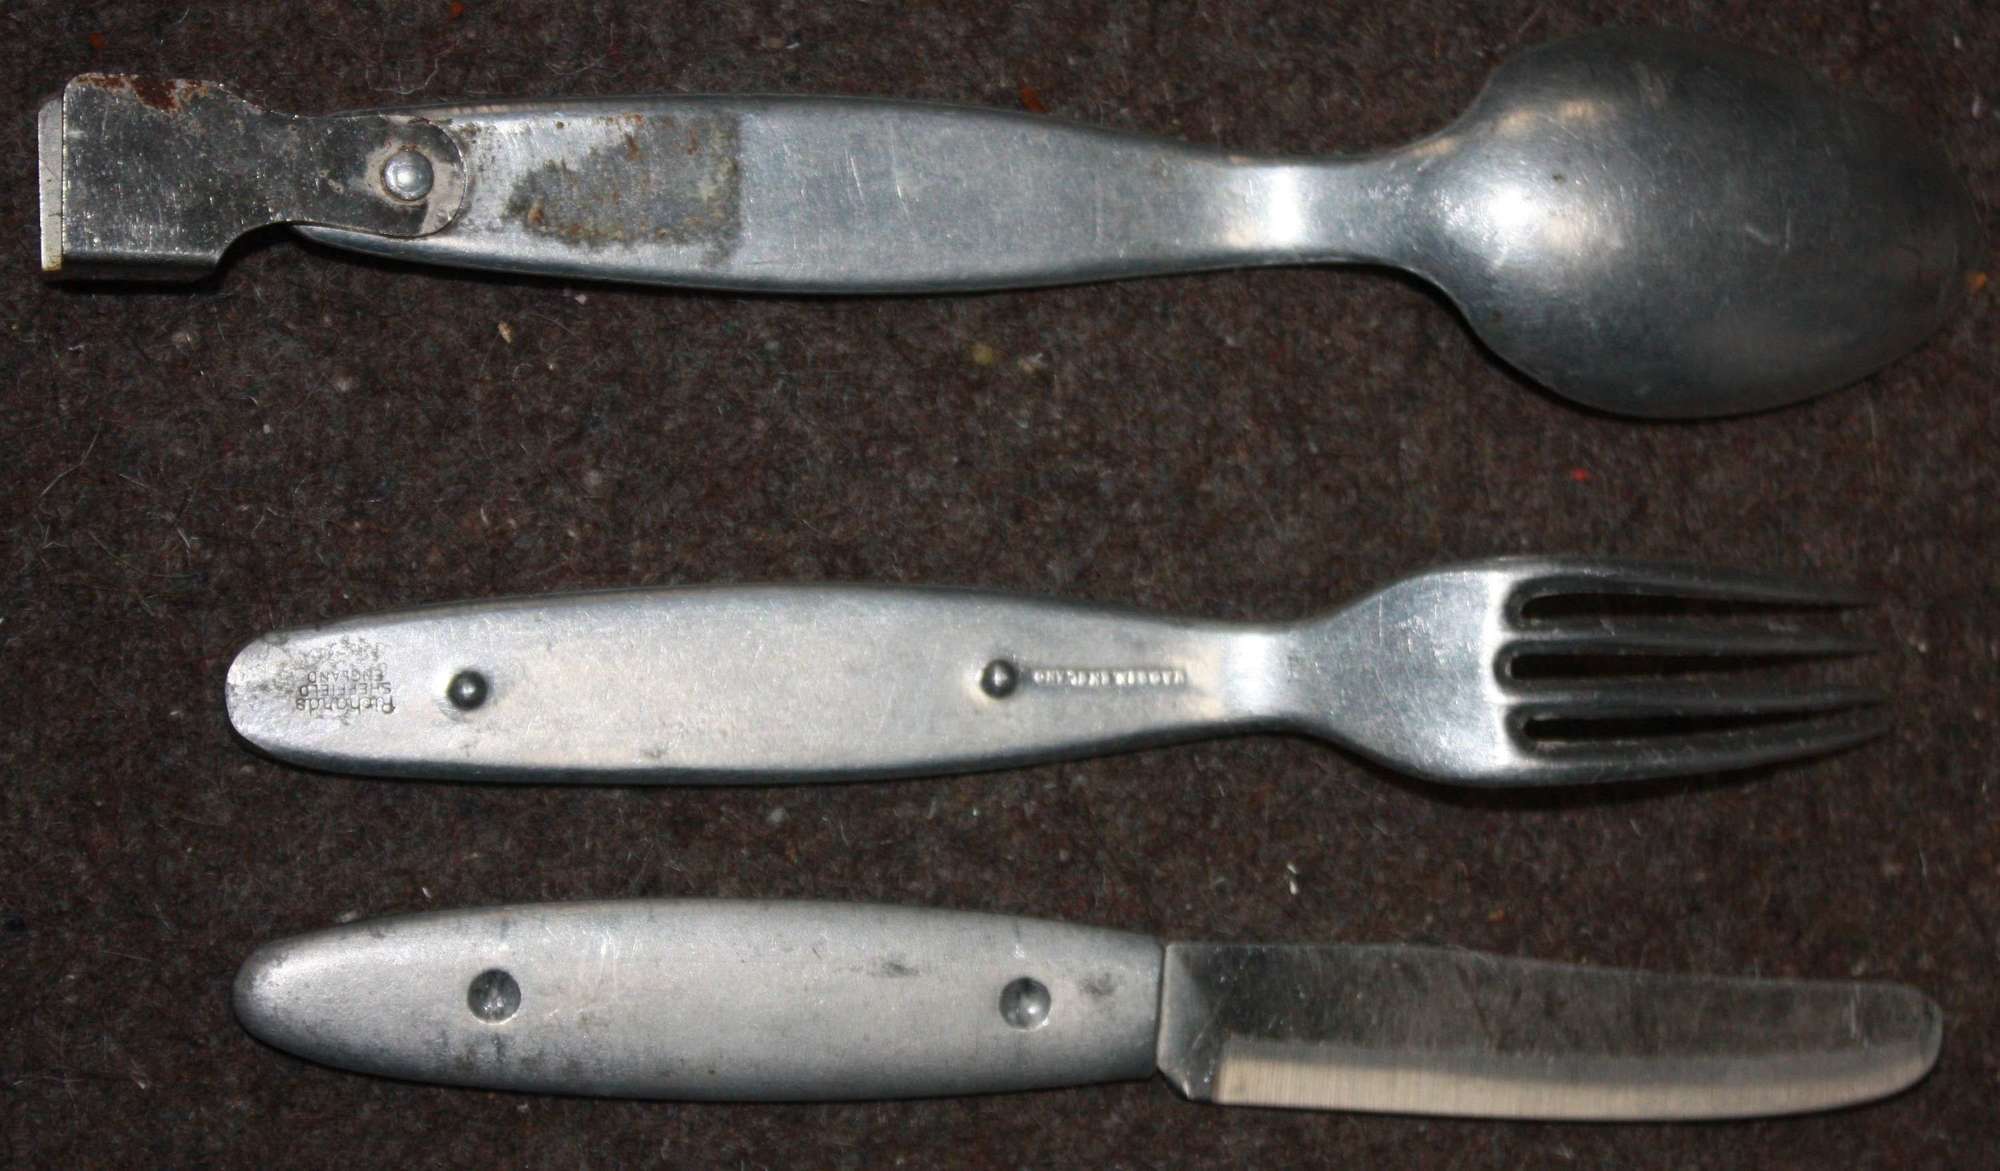 A PRIVATE PURCHASE SET OF THE RICHARTDS CUTLERY WWII STYLE